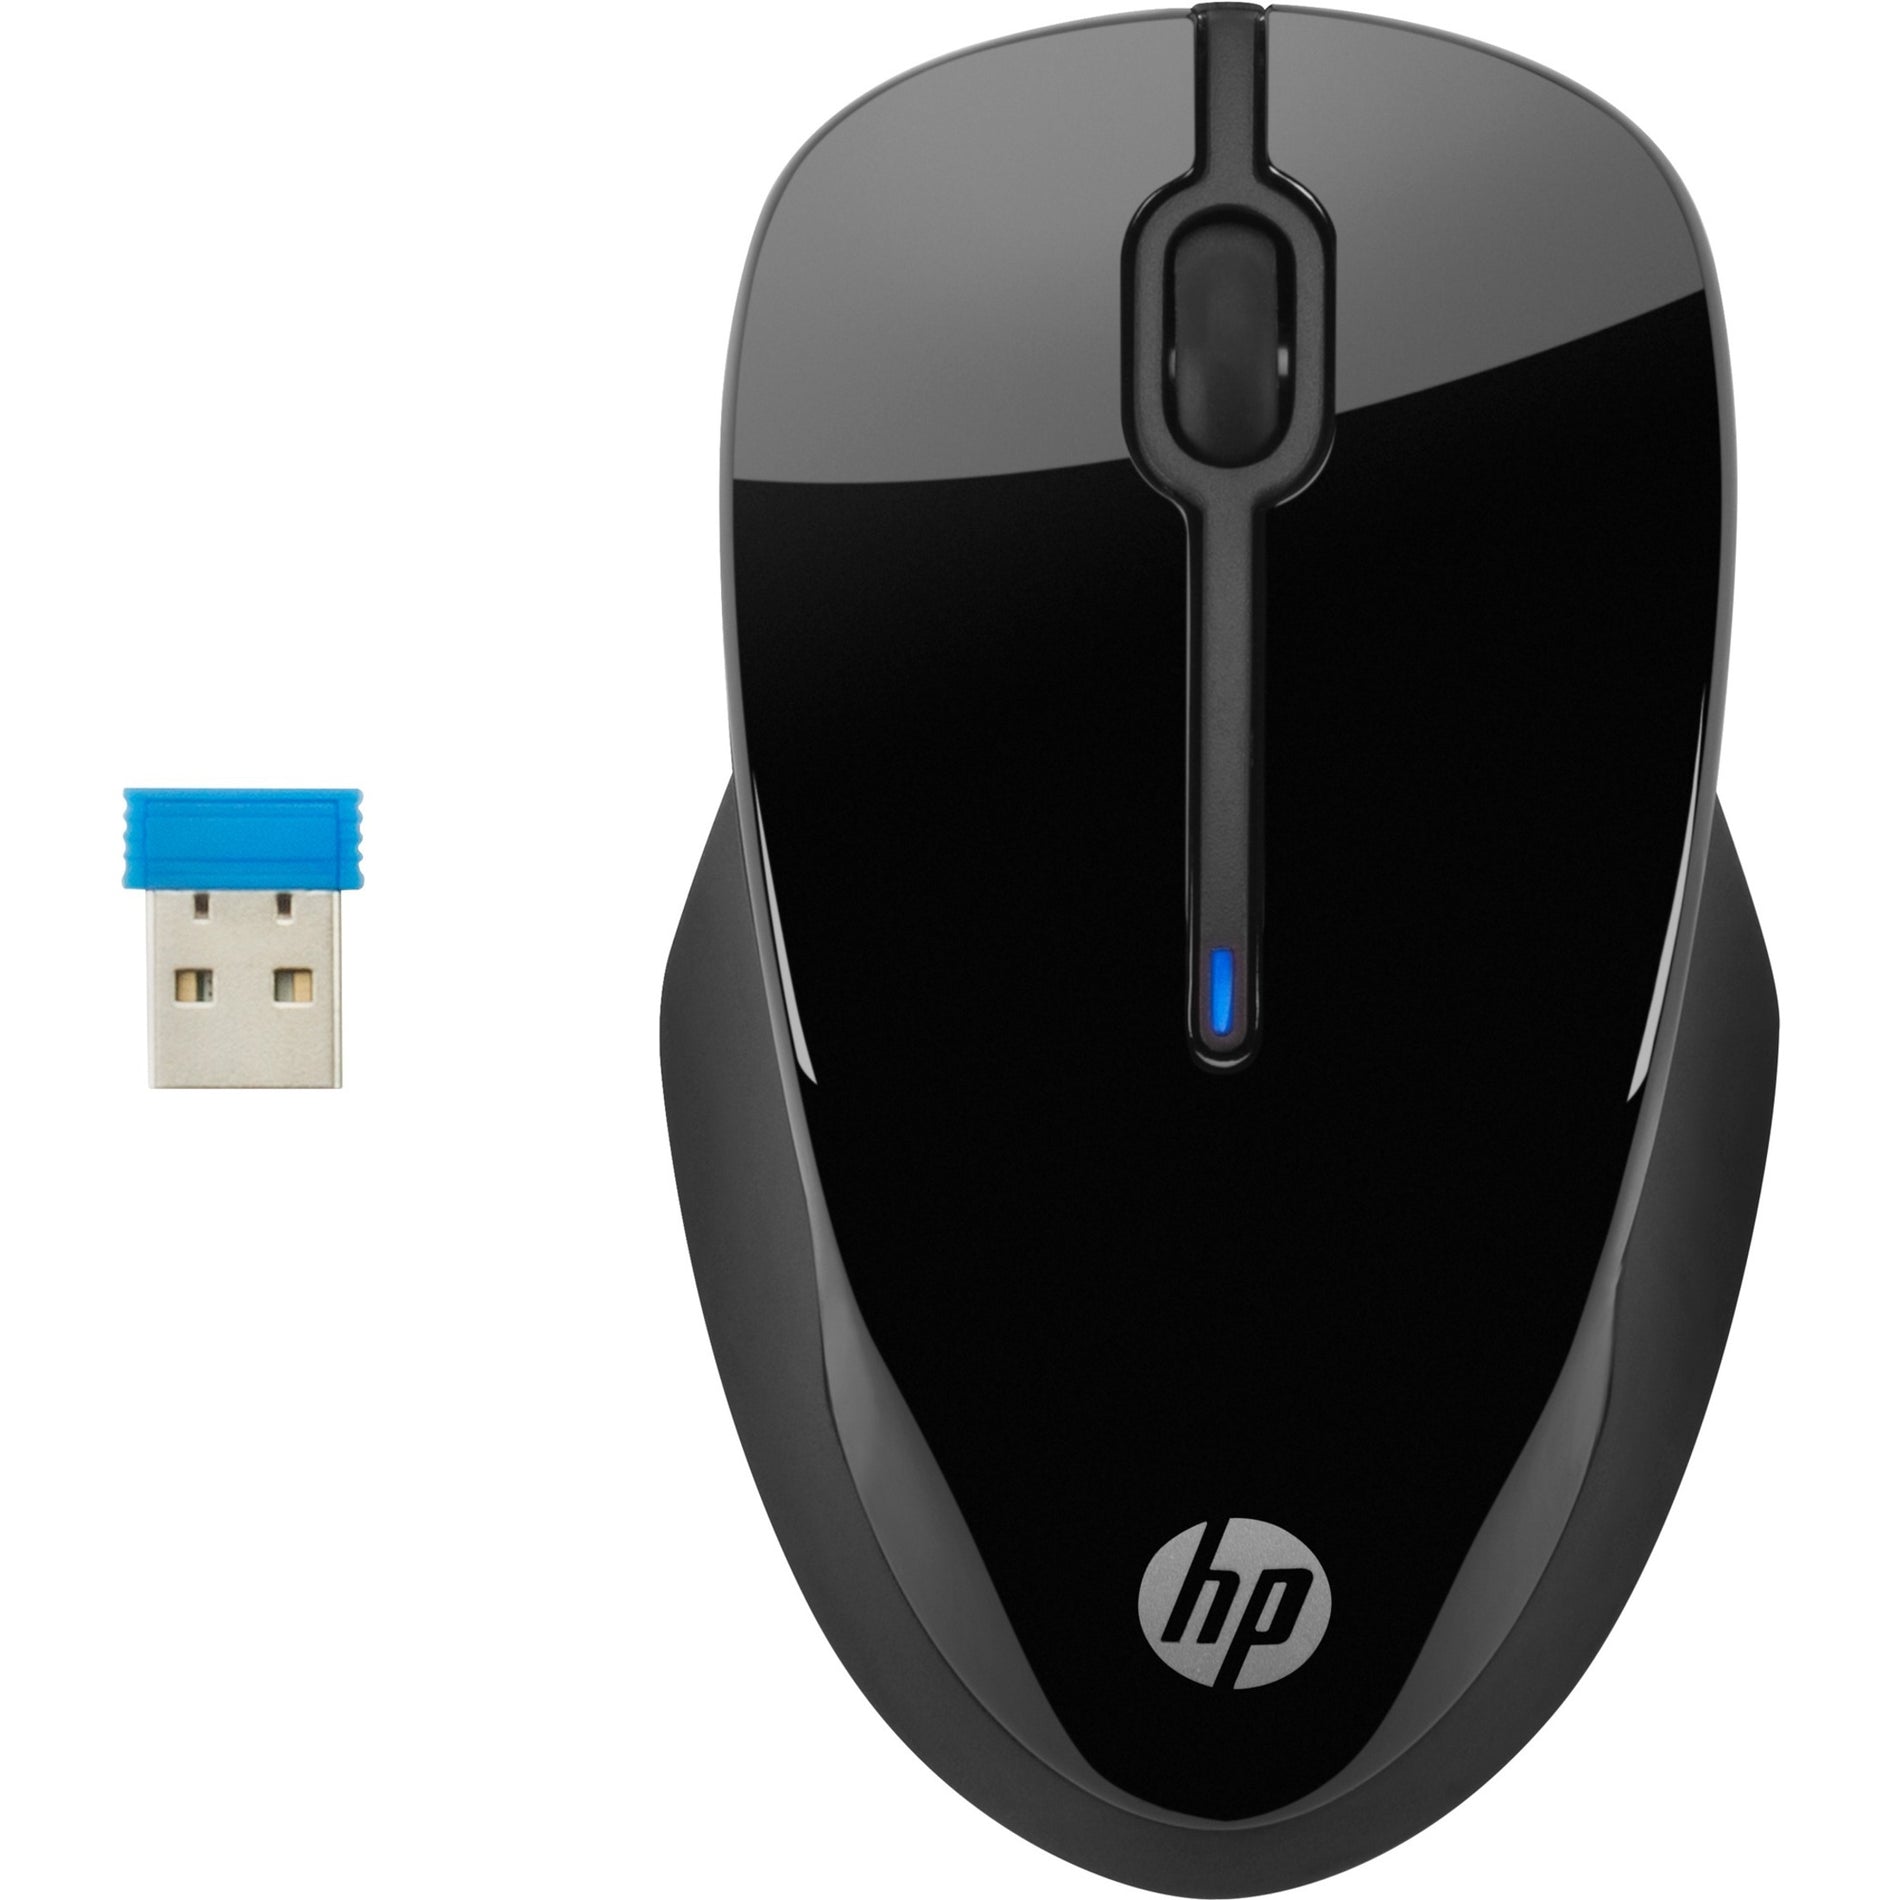 HP X3000 G2 Mouse, Wireless Optical, USB Type A, Black